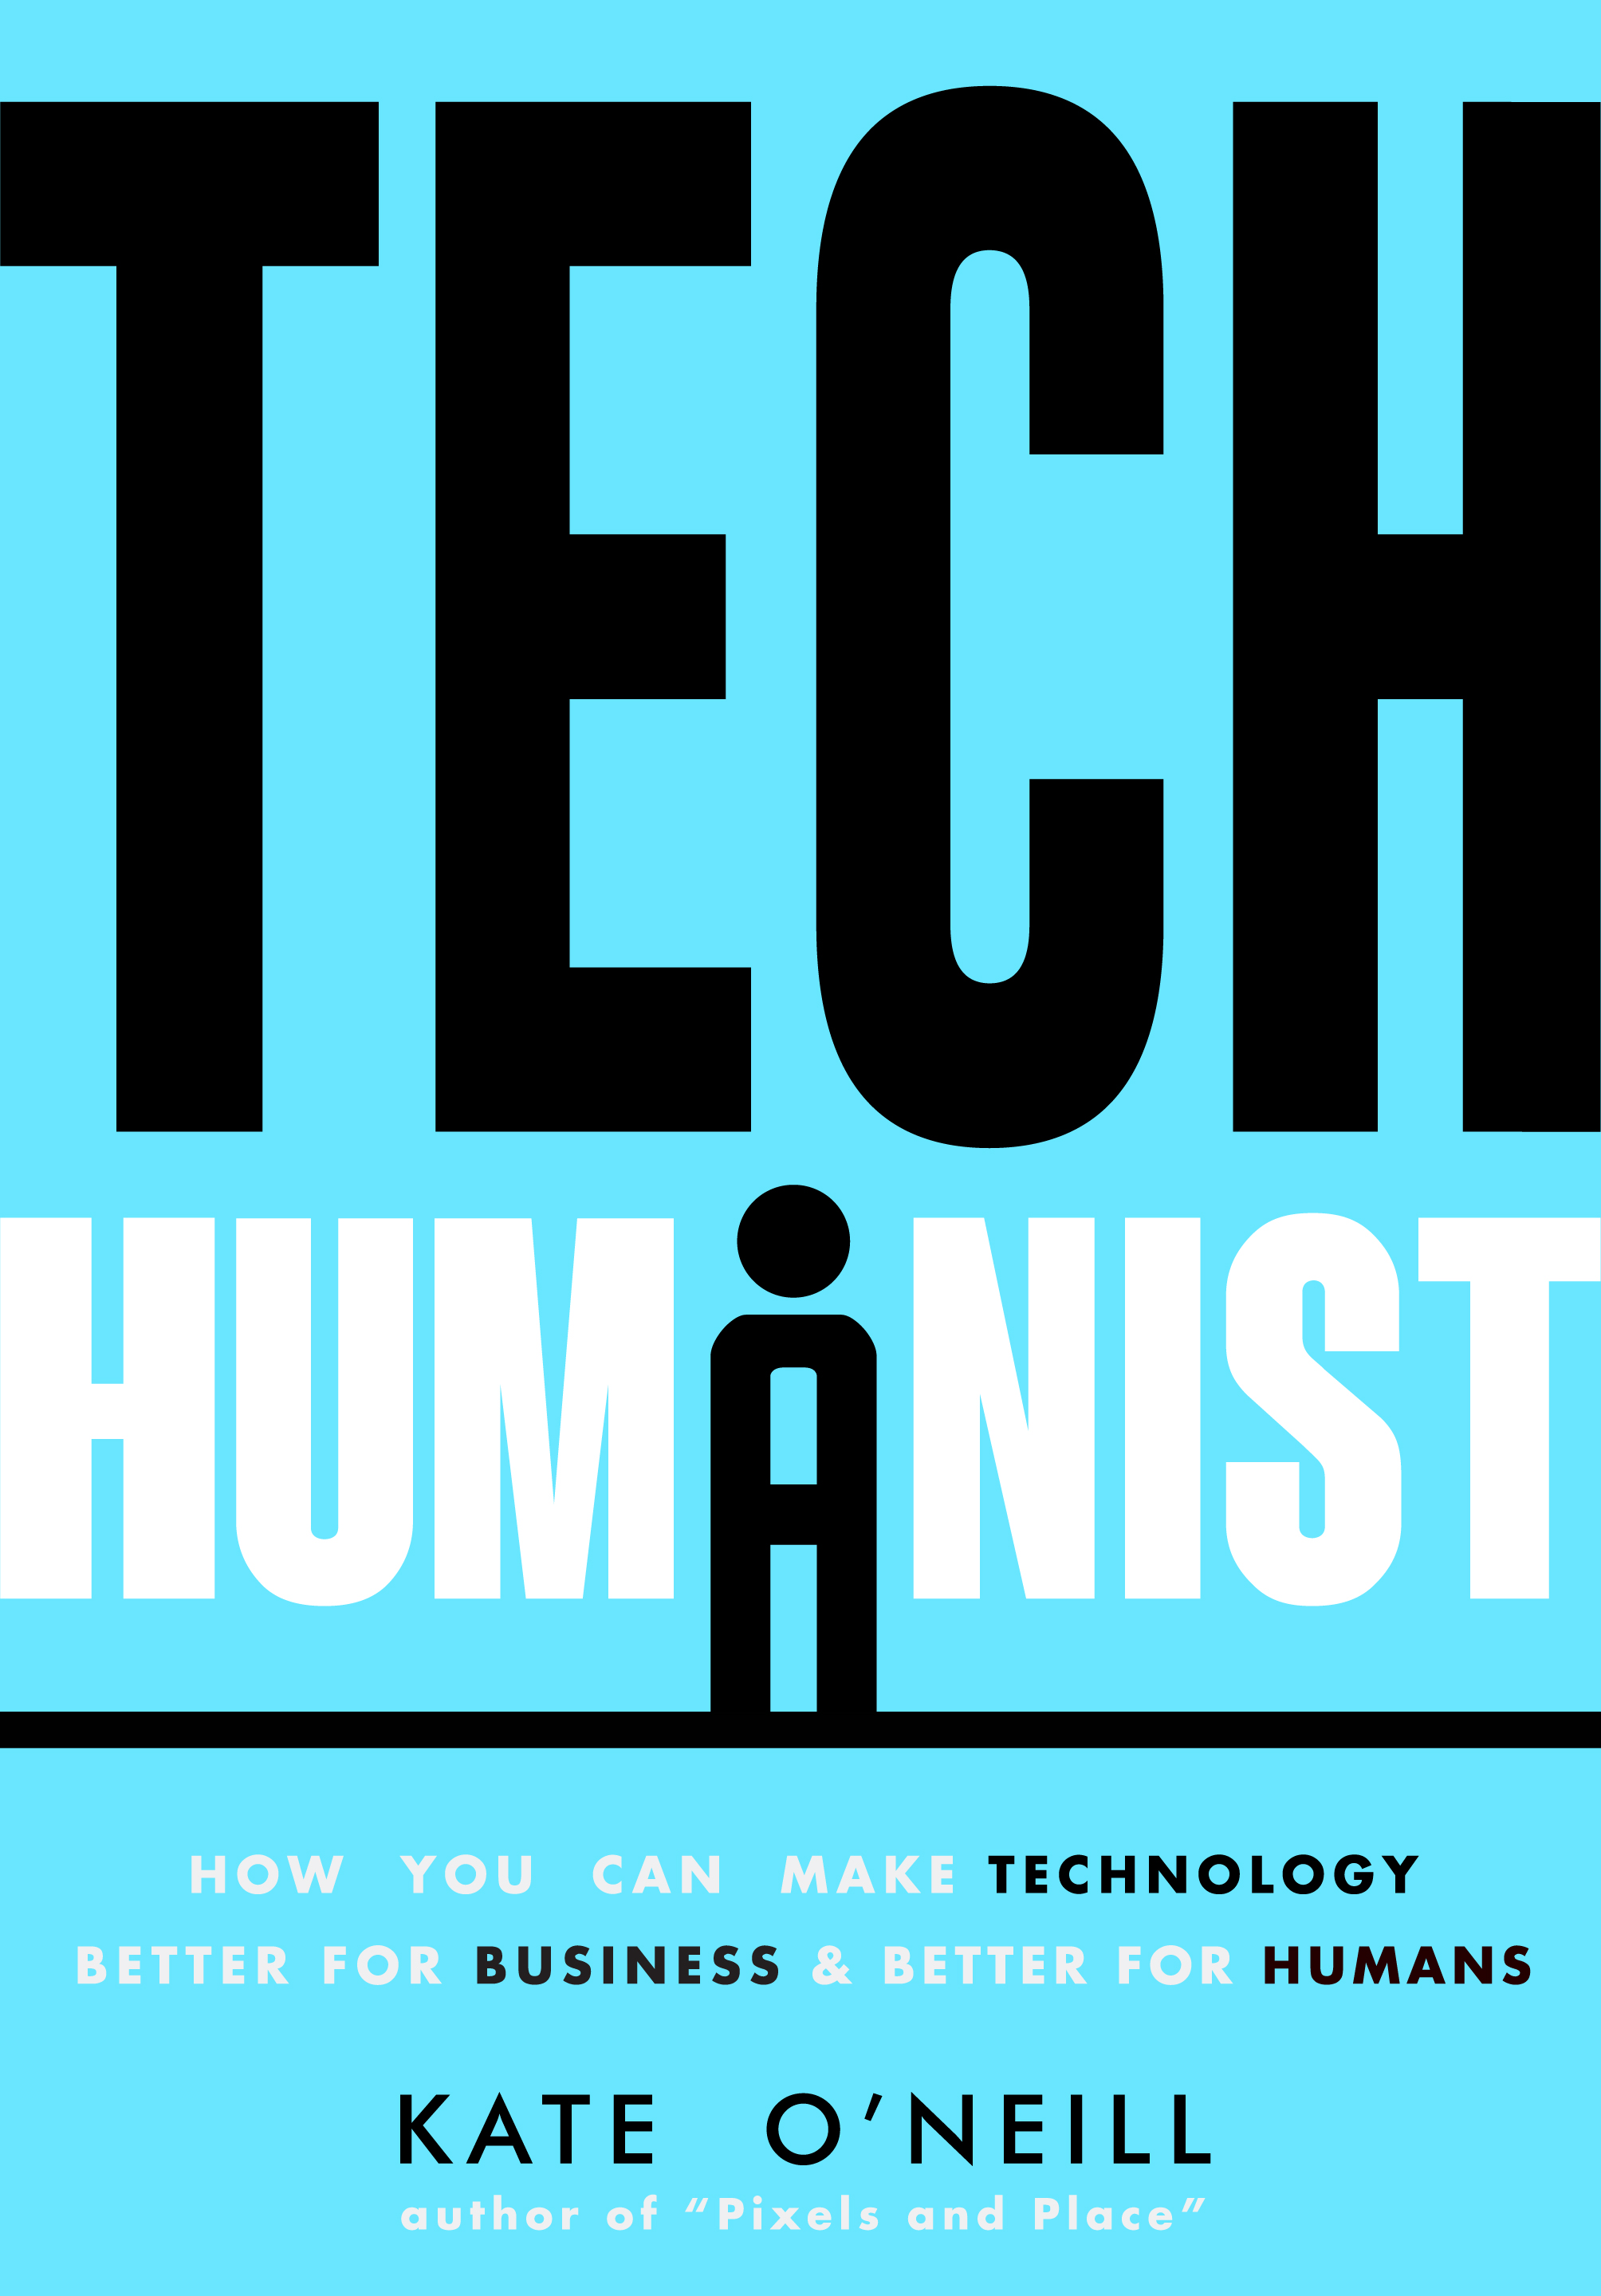 Tech Humanist front cover